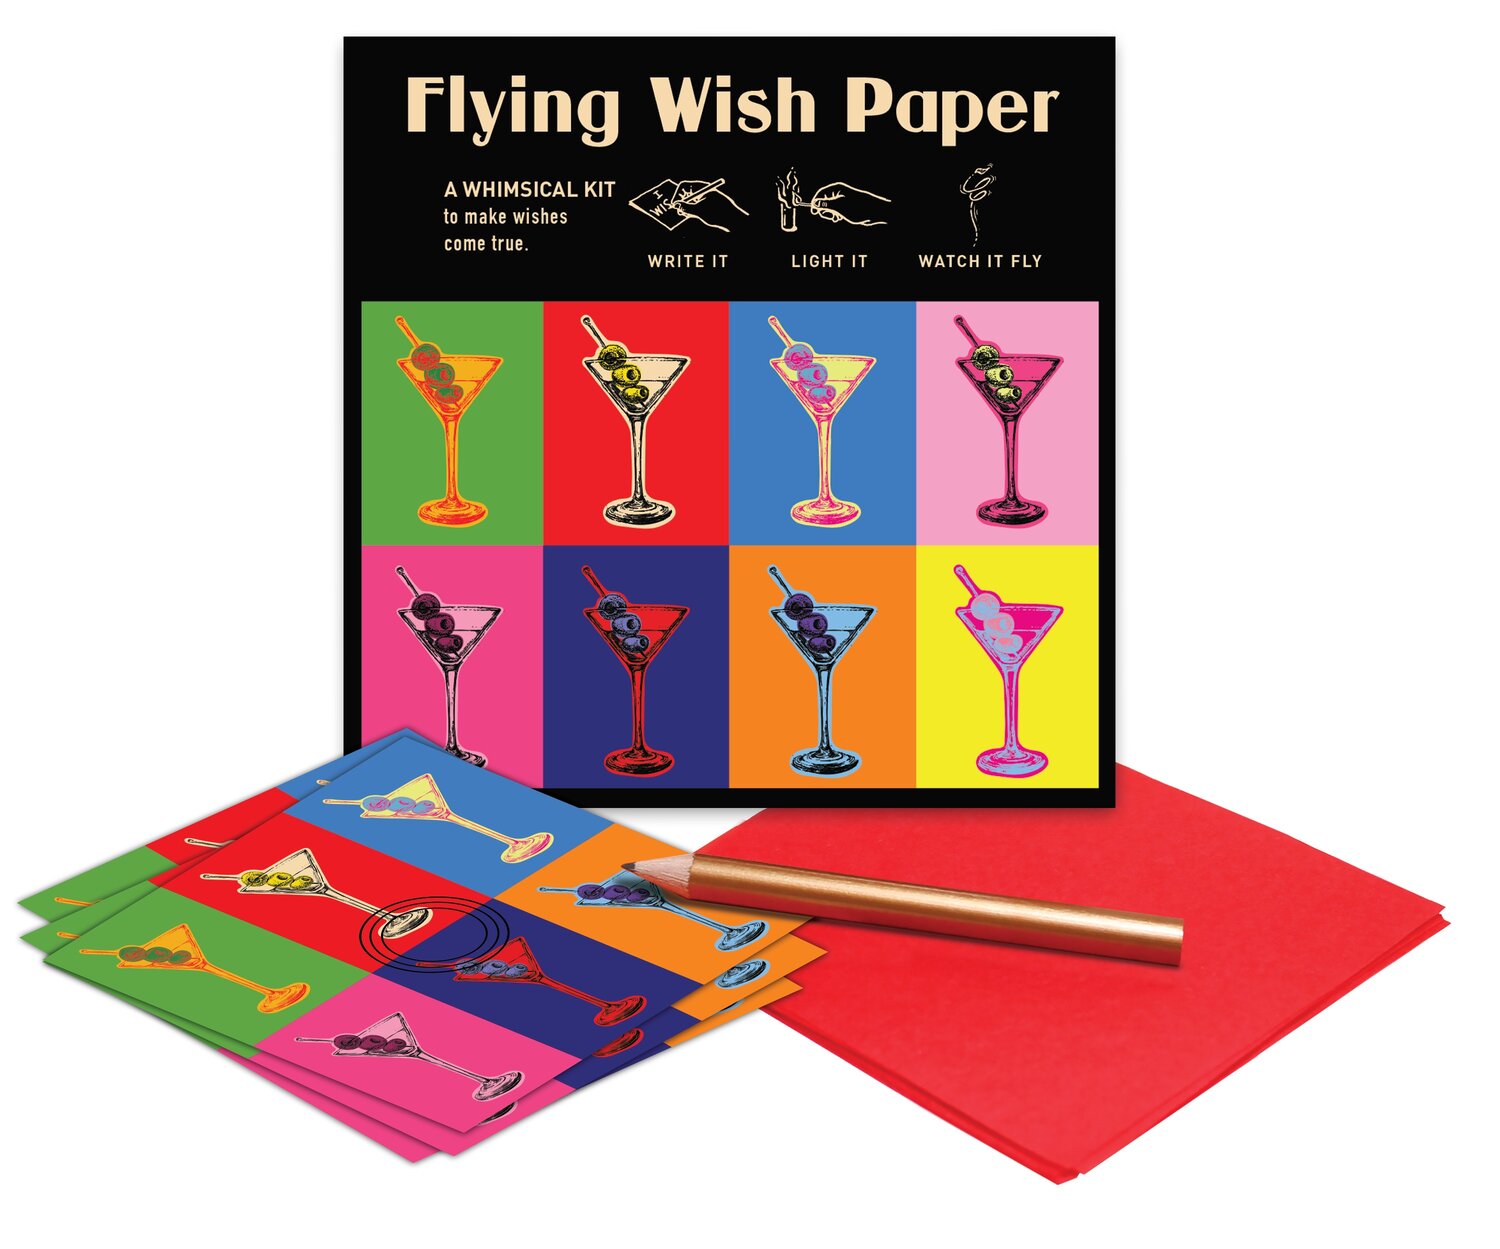 Use the Flying Wish Paper to write your wish, roll the paper, light, and watch your wish flutter away!